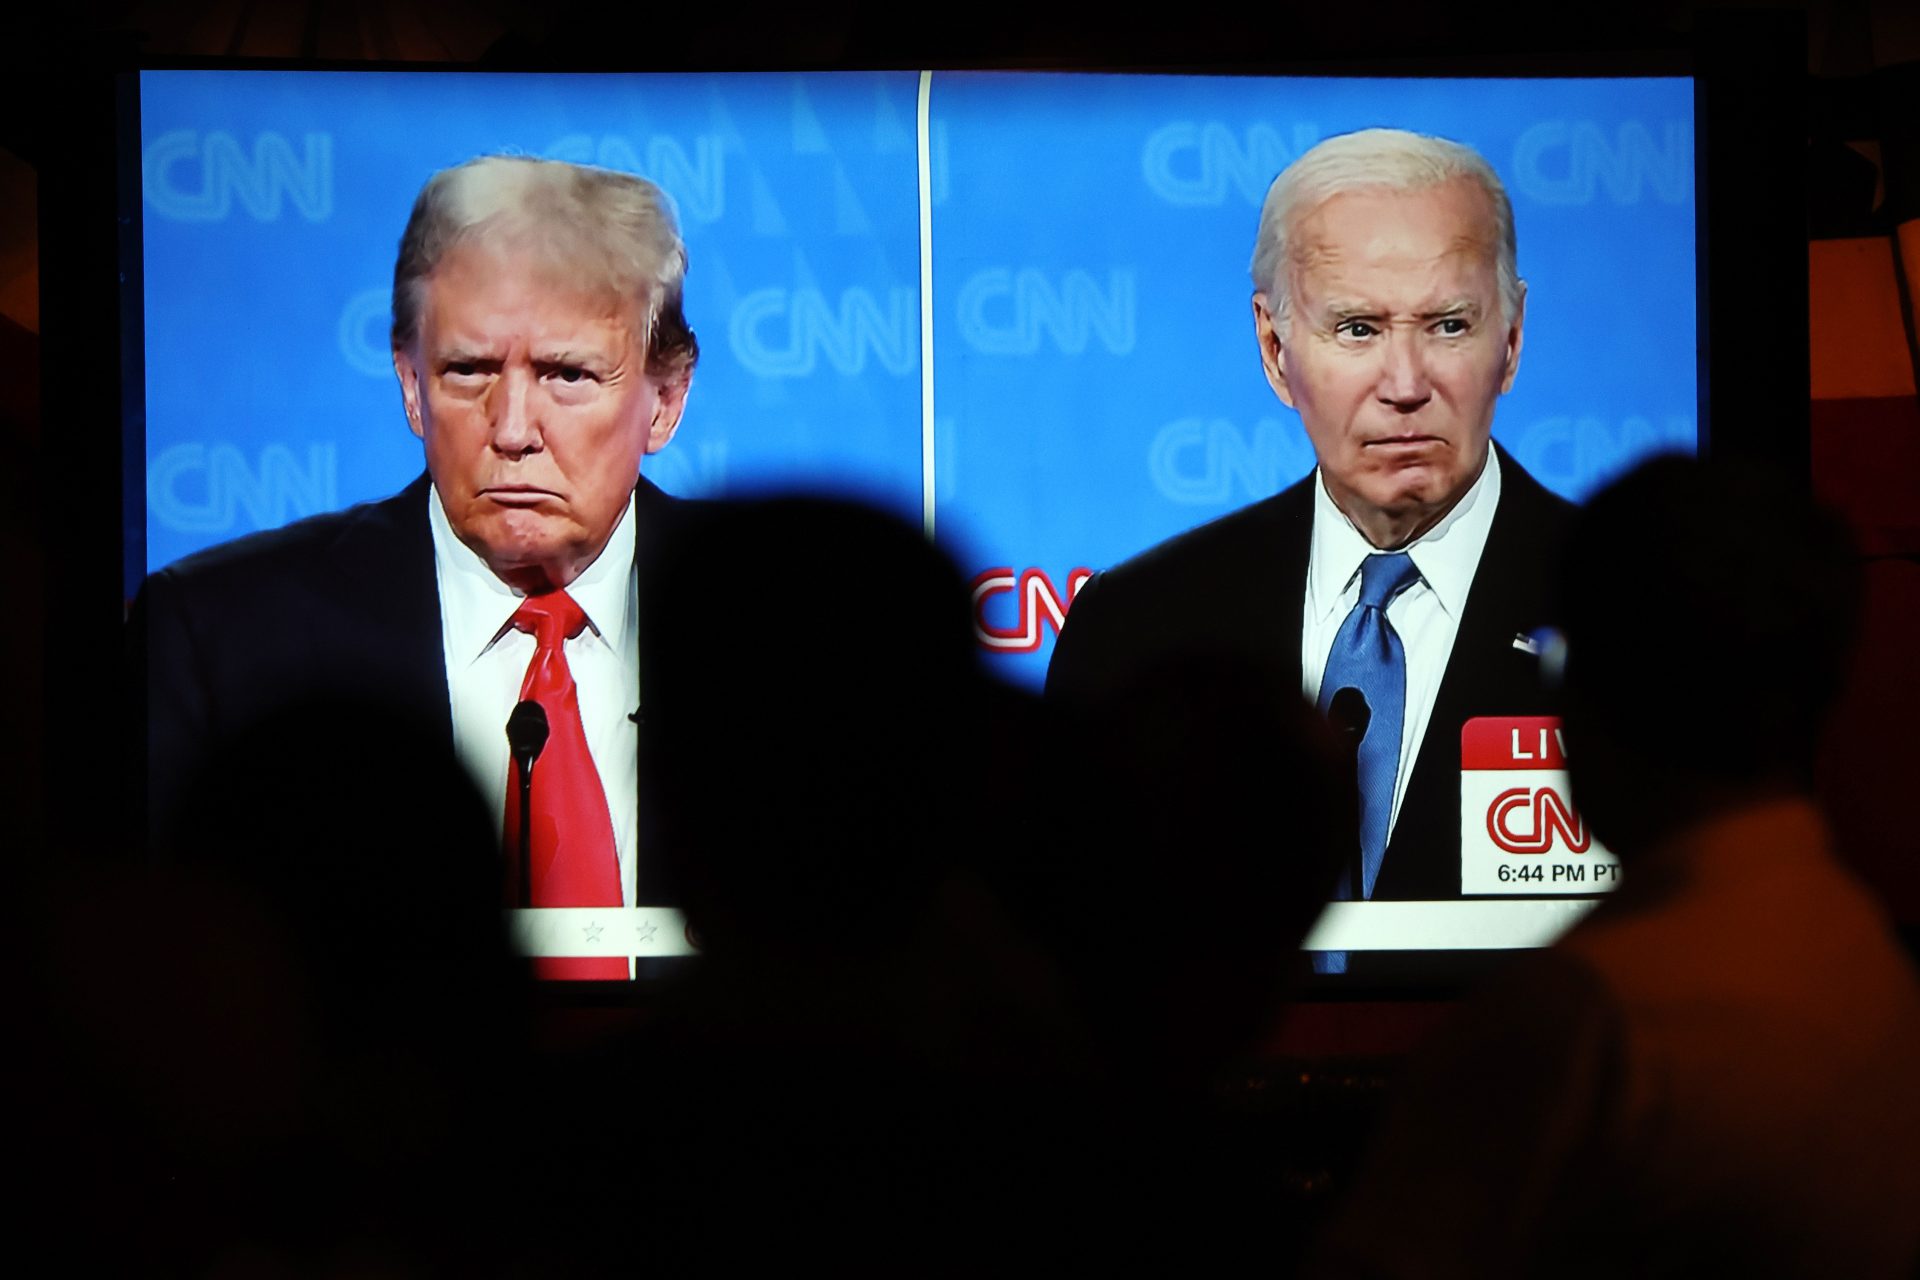 Trump thinks that if Biden can't handle a debate, he can't handle being president